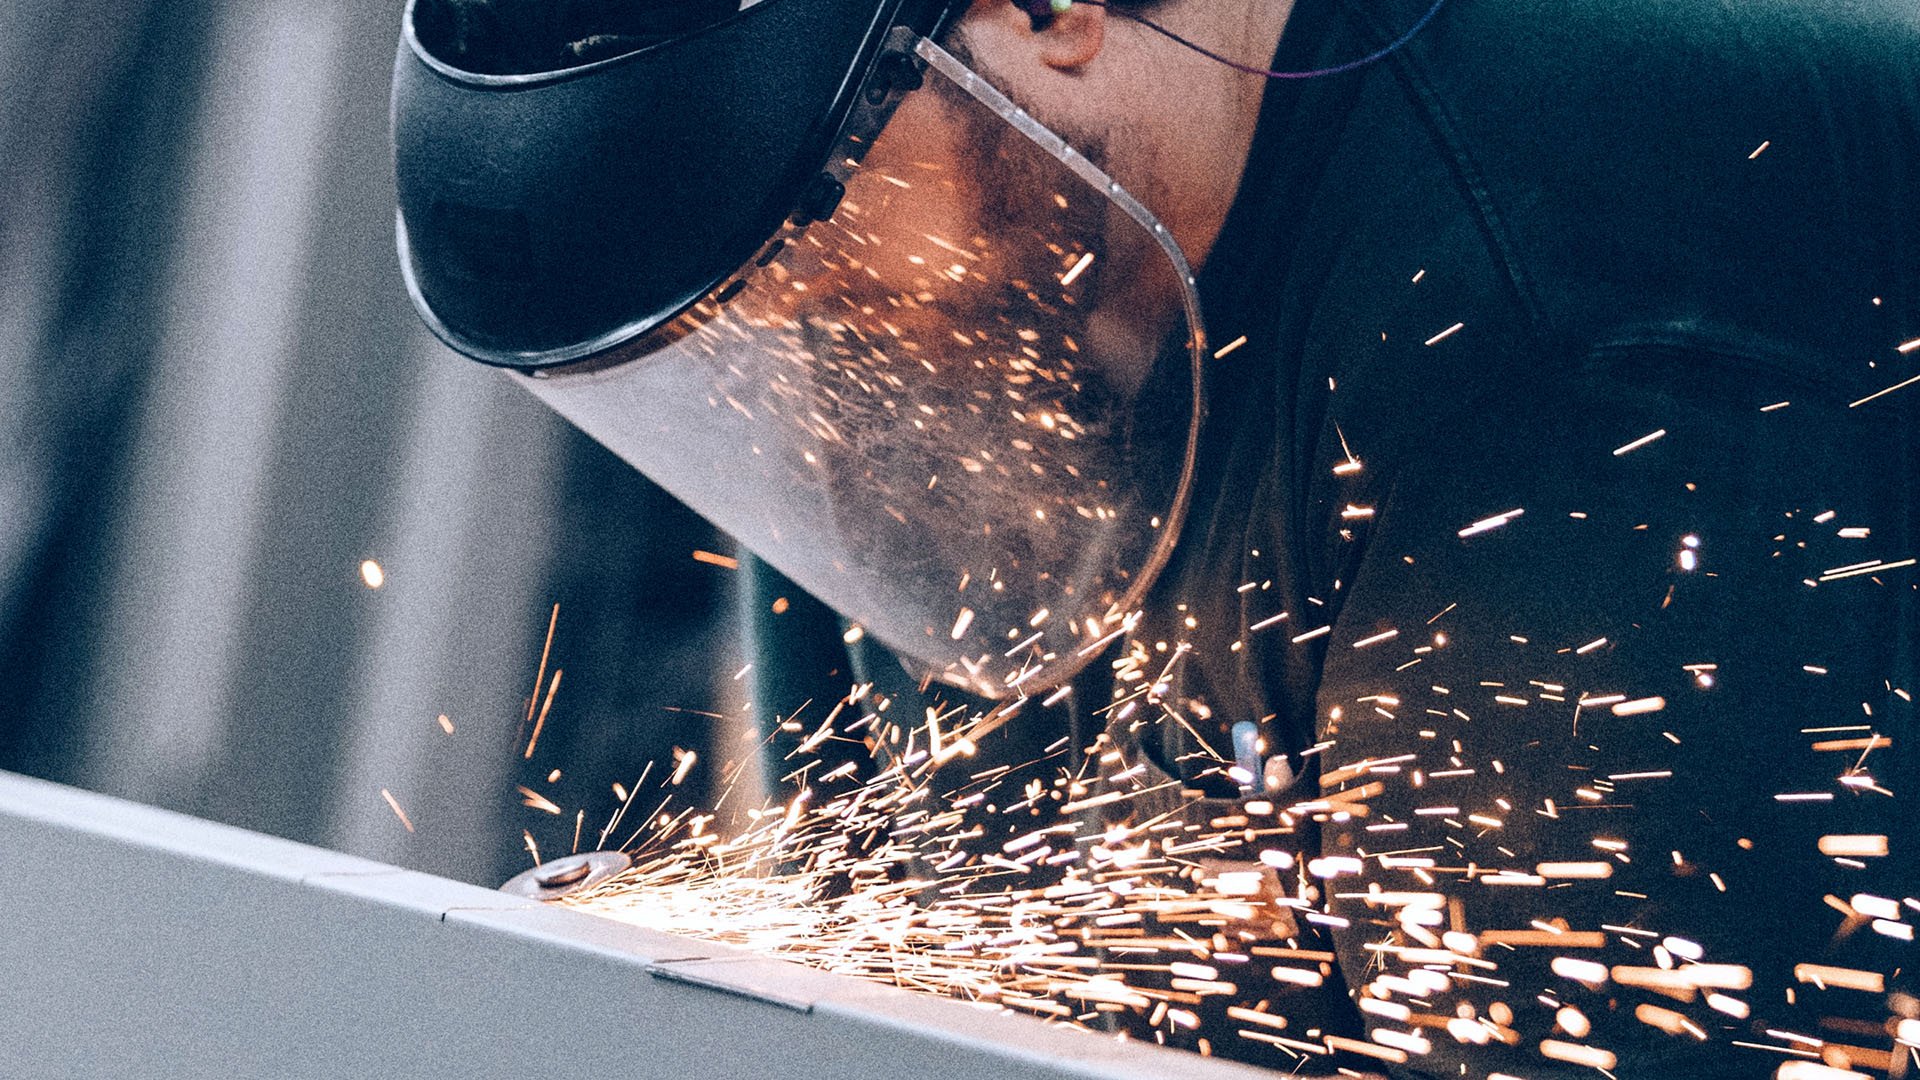 Man welding with sparks flying